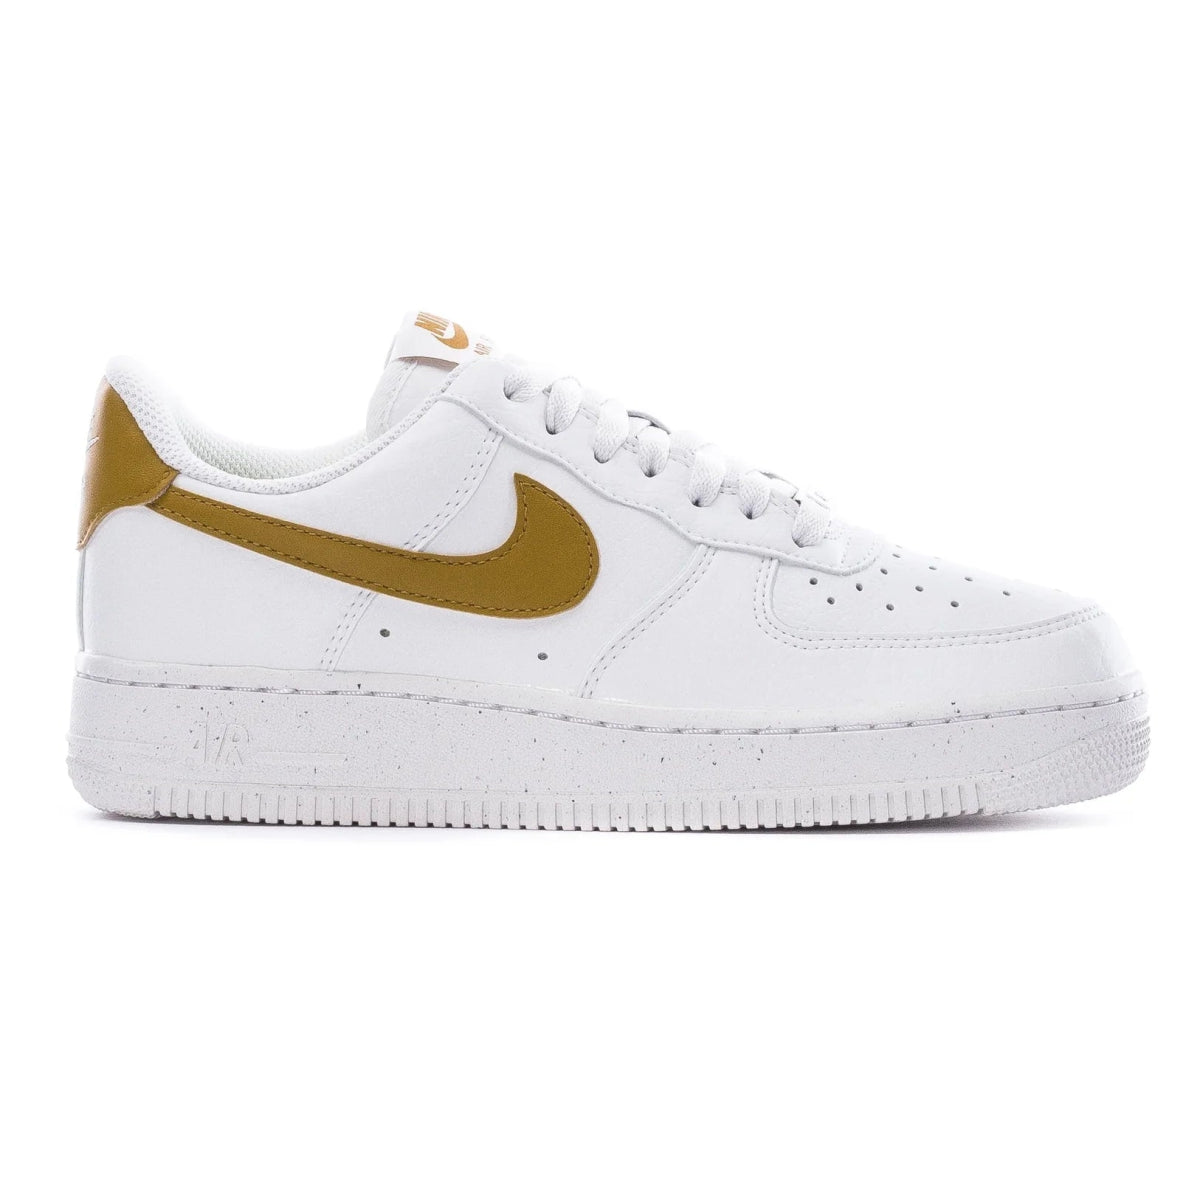 Nike Women's Air Force 1 '07 White/Bronze - 10037159 - West NYC